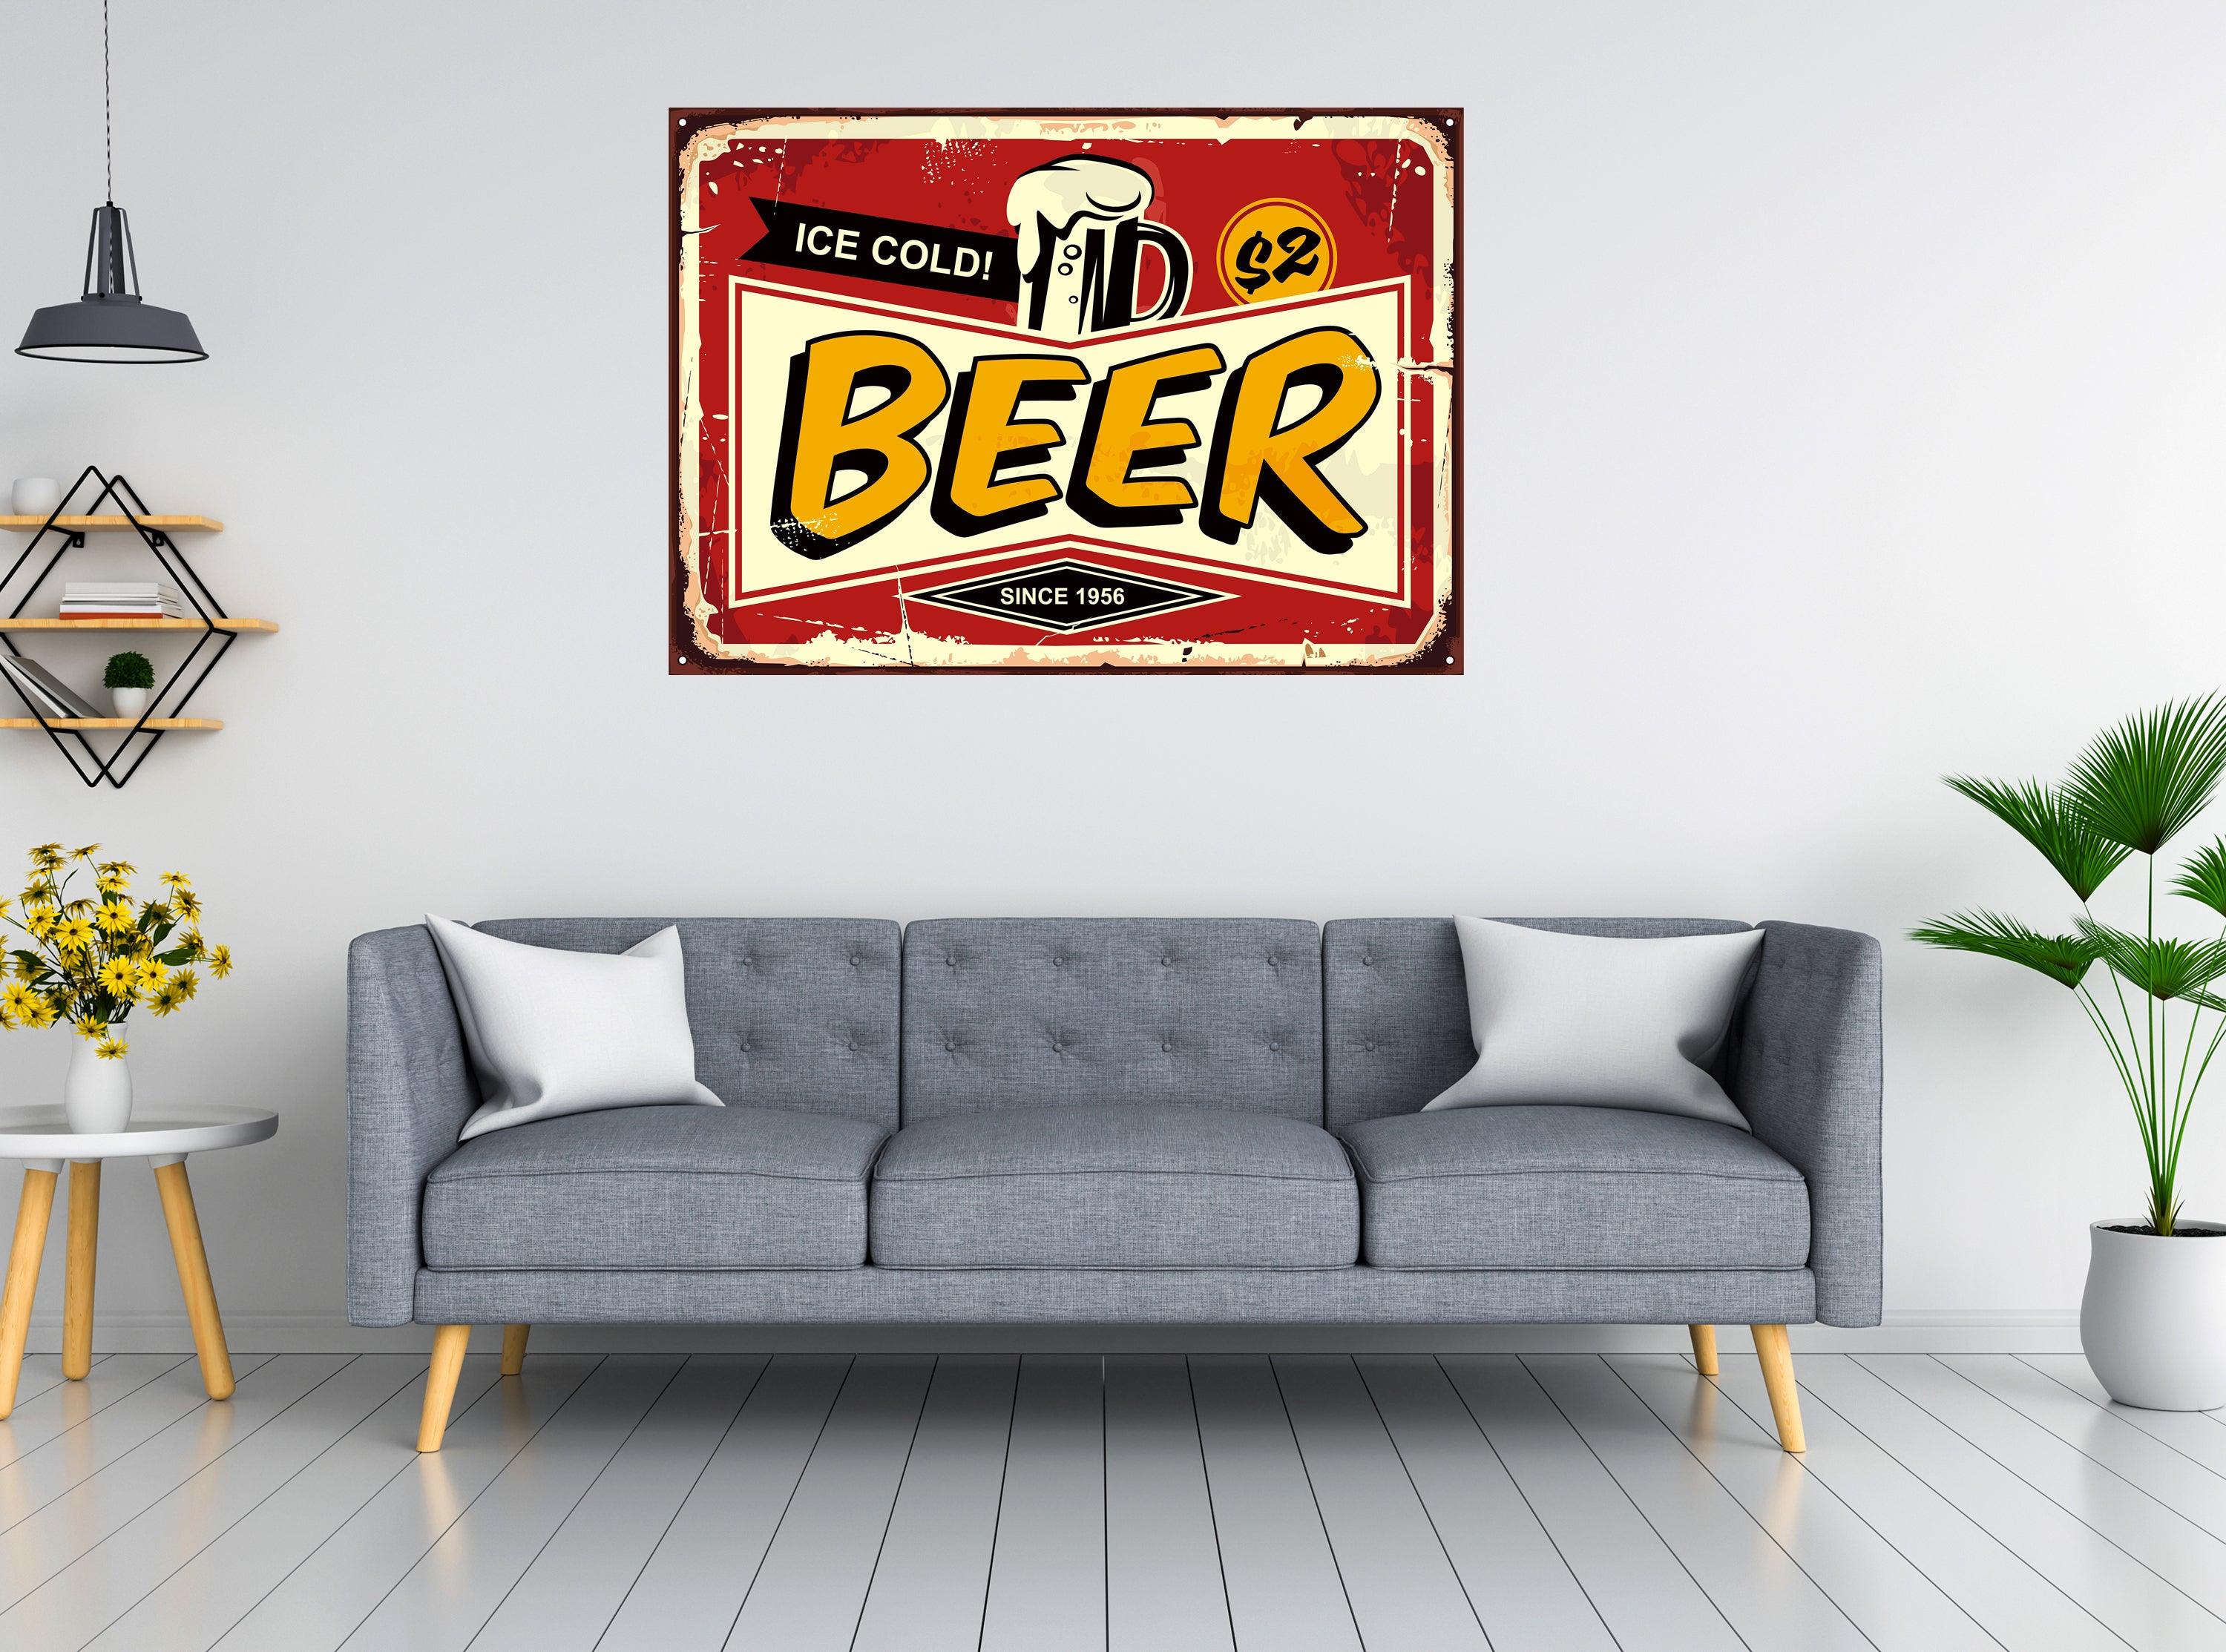 Ice Cold Beer 2 dollars Sign Decal